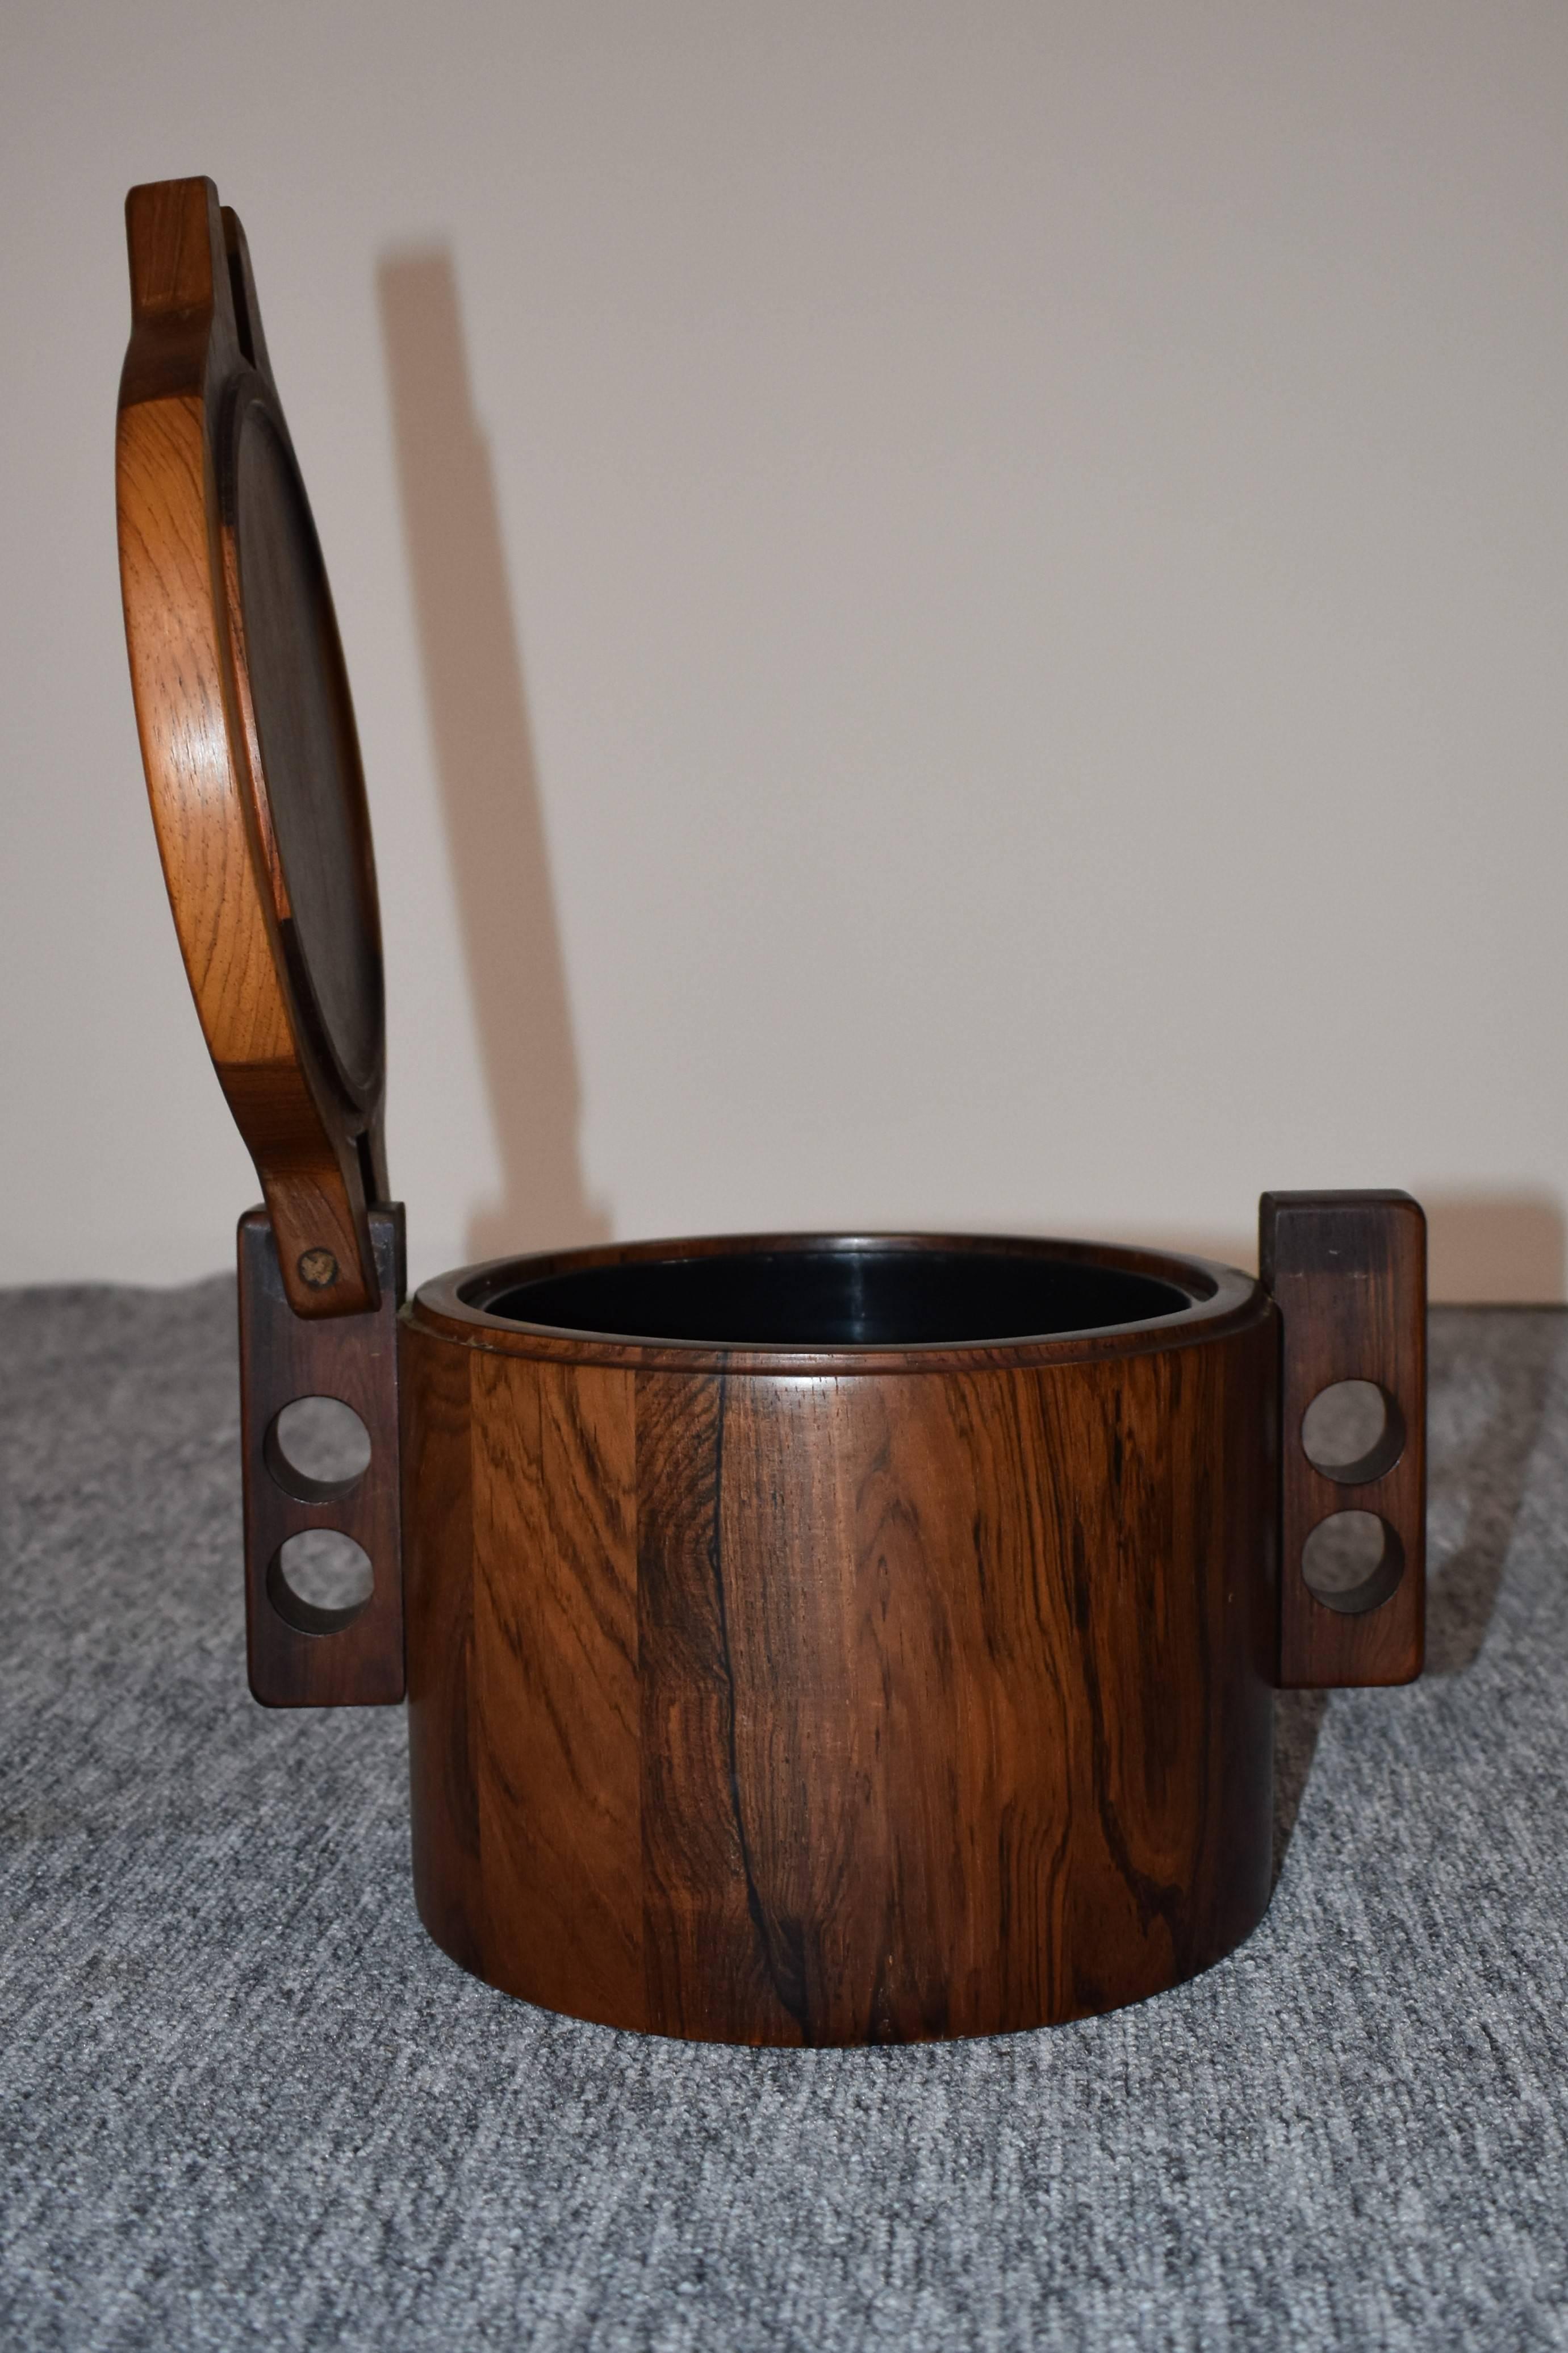 Icebucket by Birgit Krogh in rosewood from the 1960s, a very stylish piece.